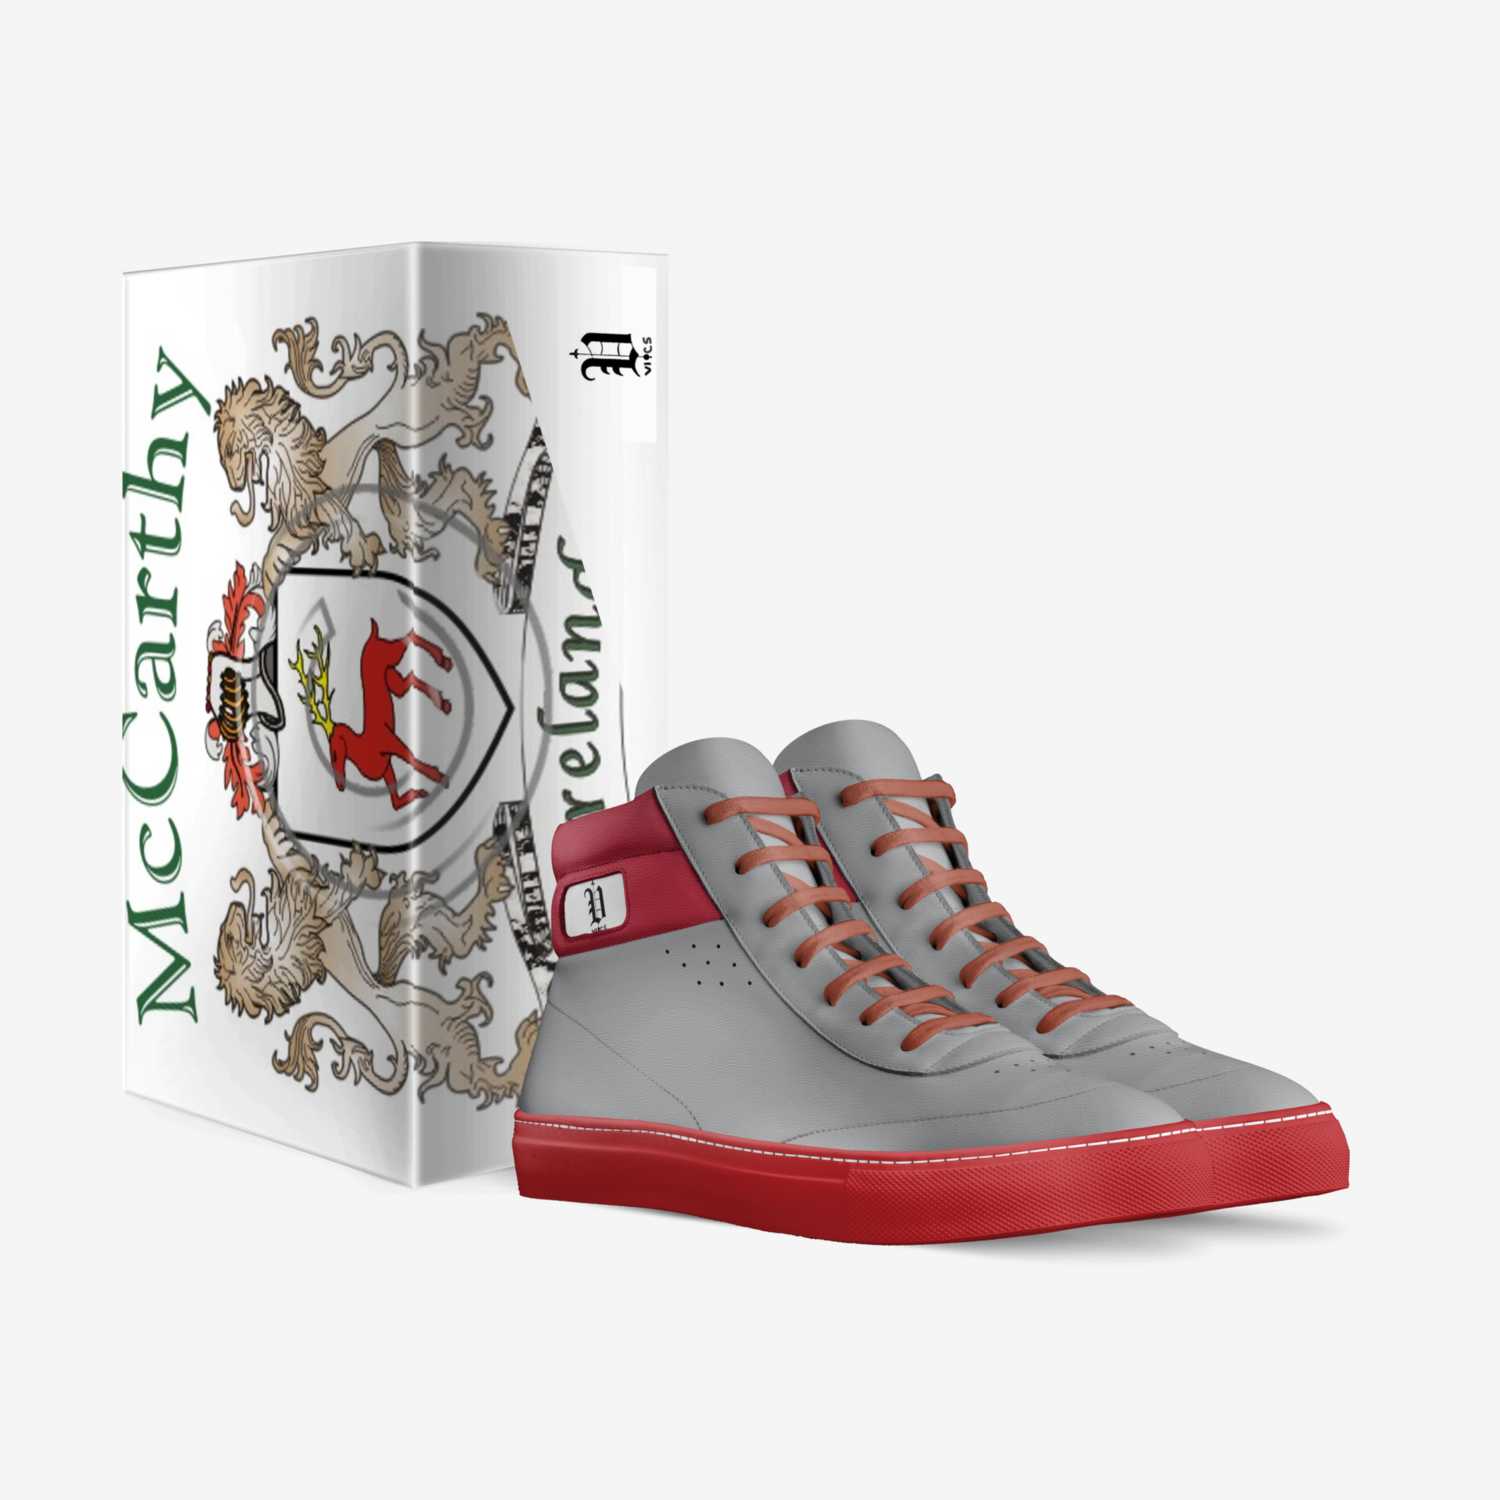 vics mccarty custom made in Italy shoes by Brayden Murphy | Box view